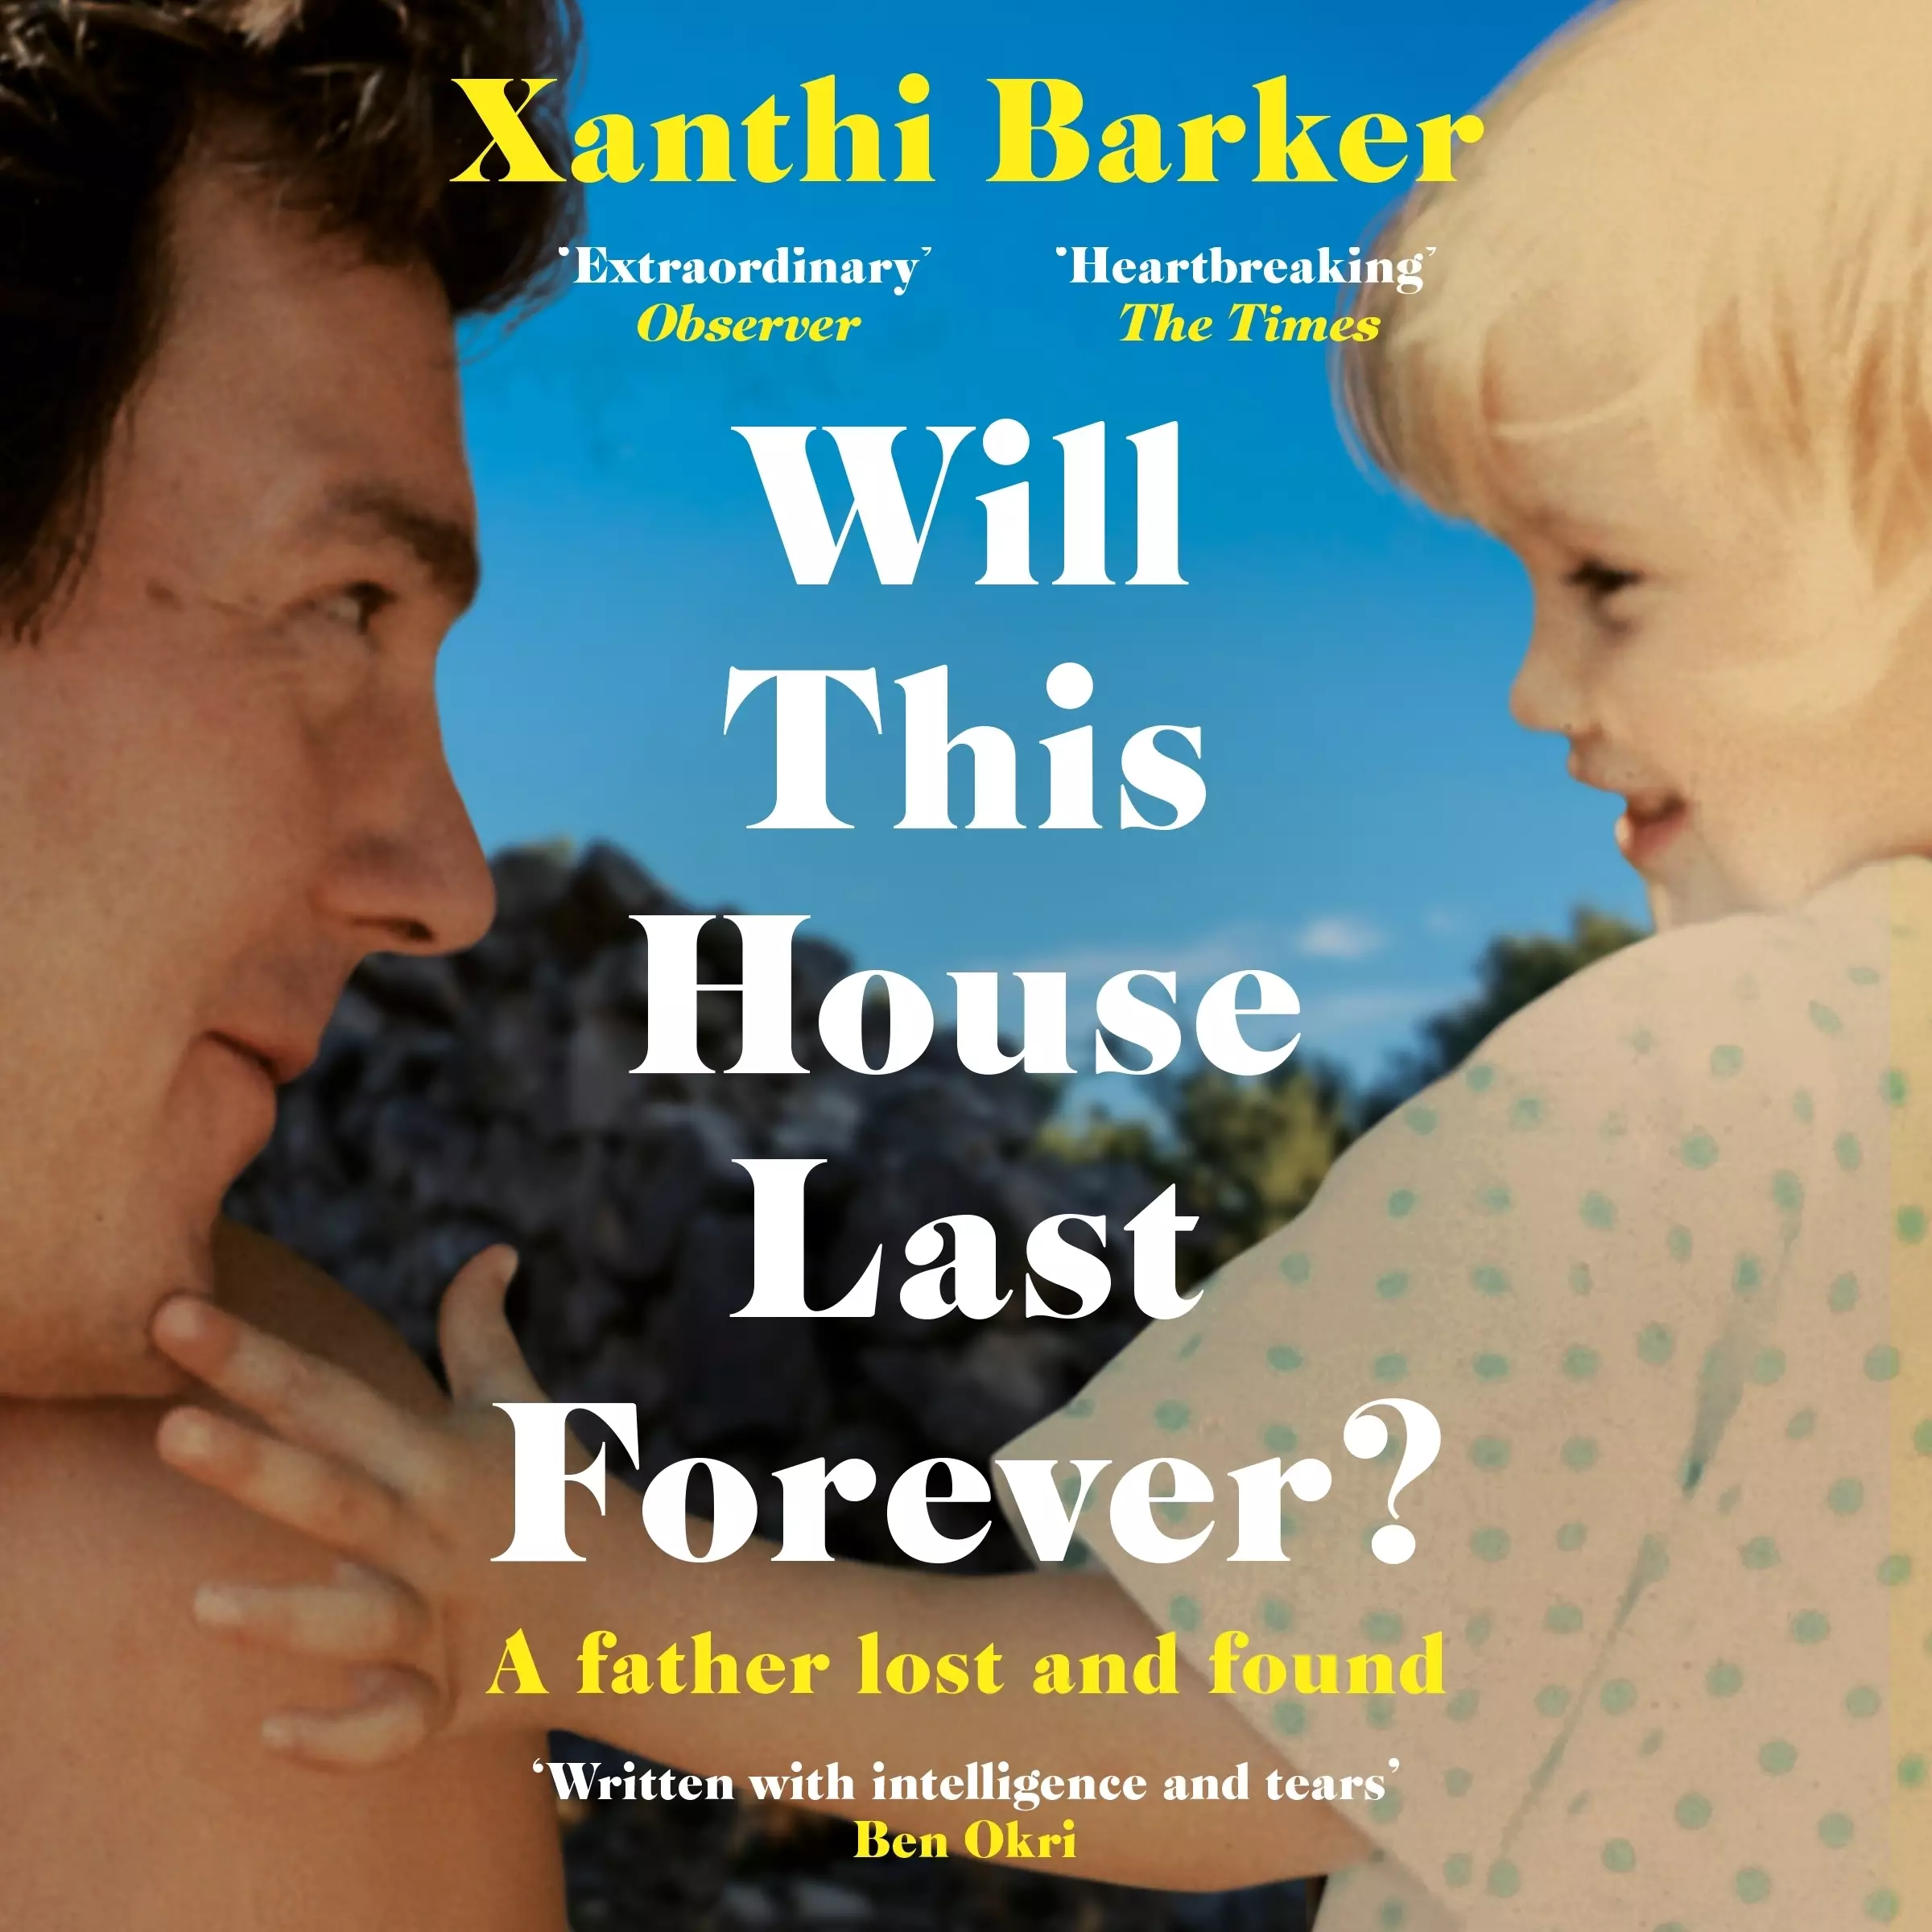 Will This House Last Forever?